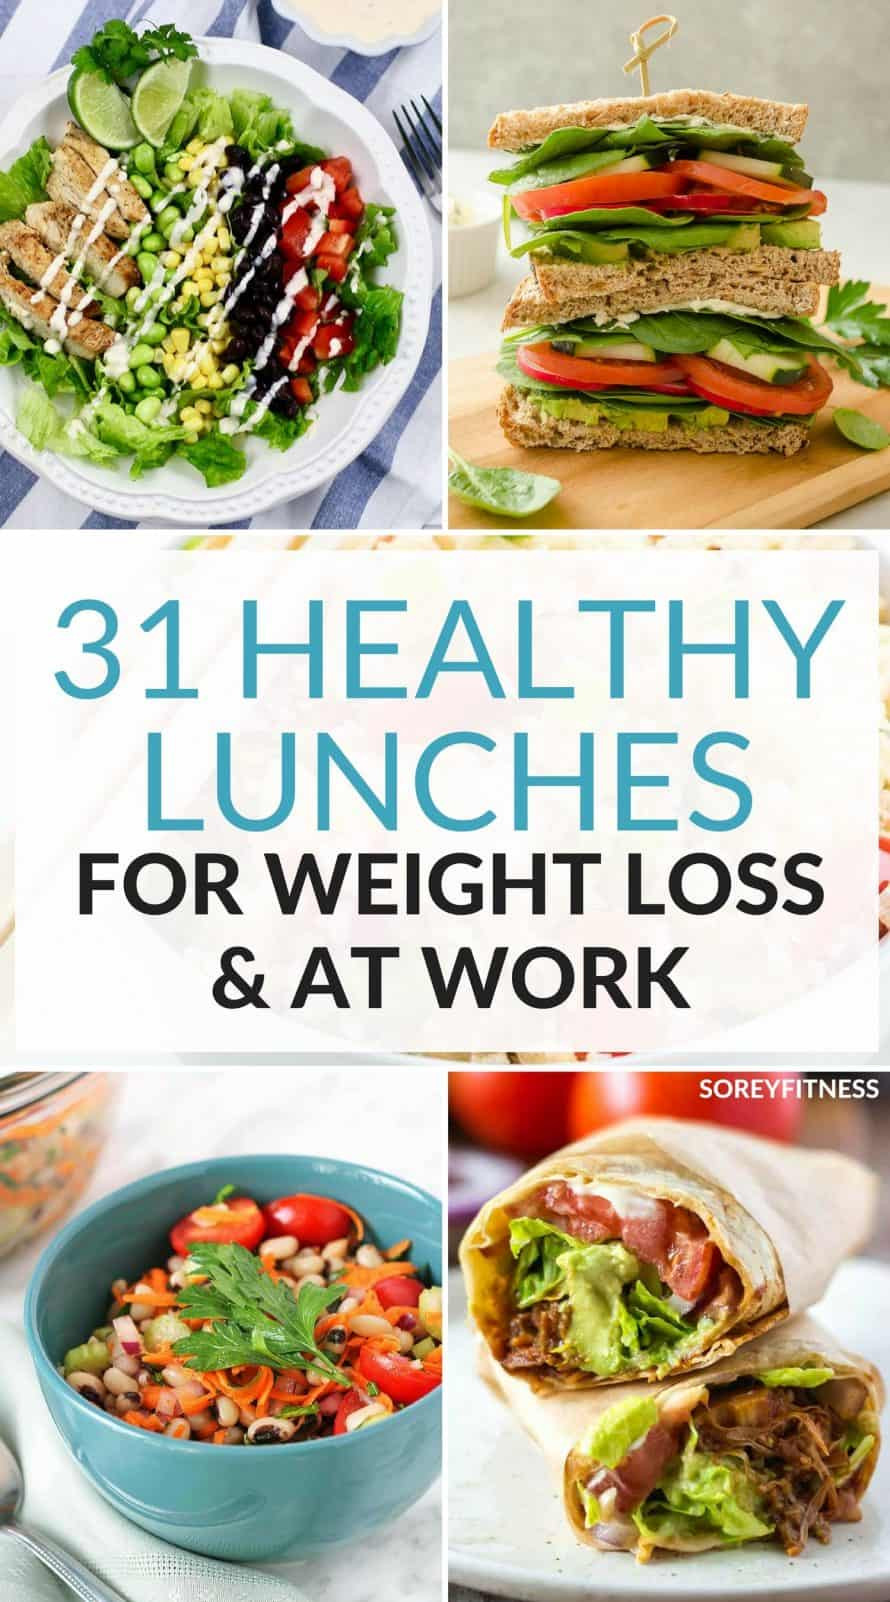 Healthy Meal Recipes For Weight Loss
 31 Healthy Lunch Ideas For Weight Loss Easy Meals for